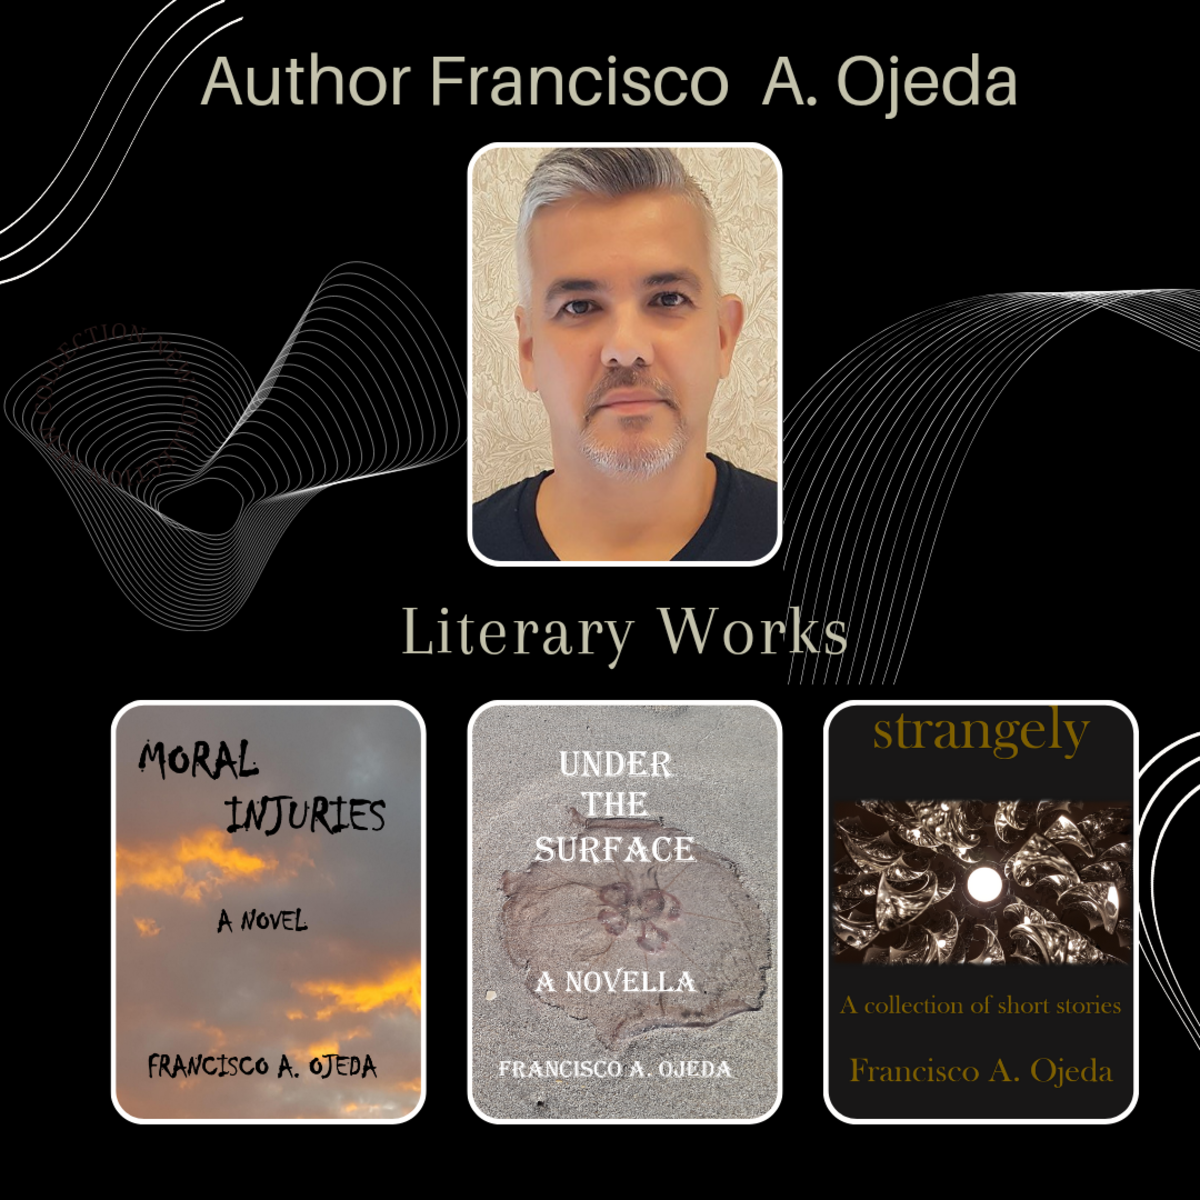 Interview With Author Francisco A. Ojeda